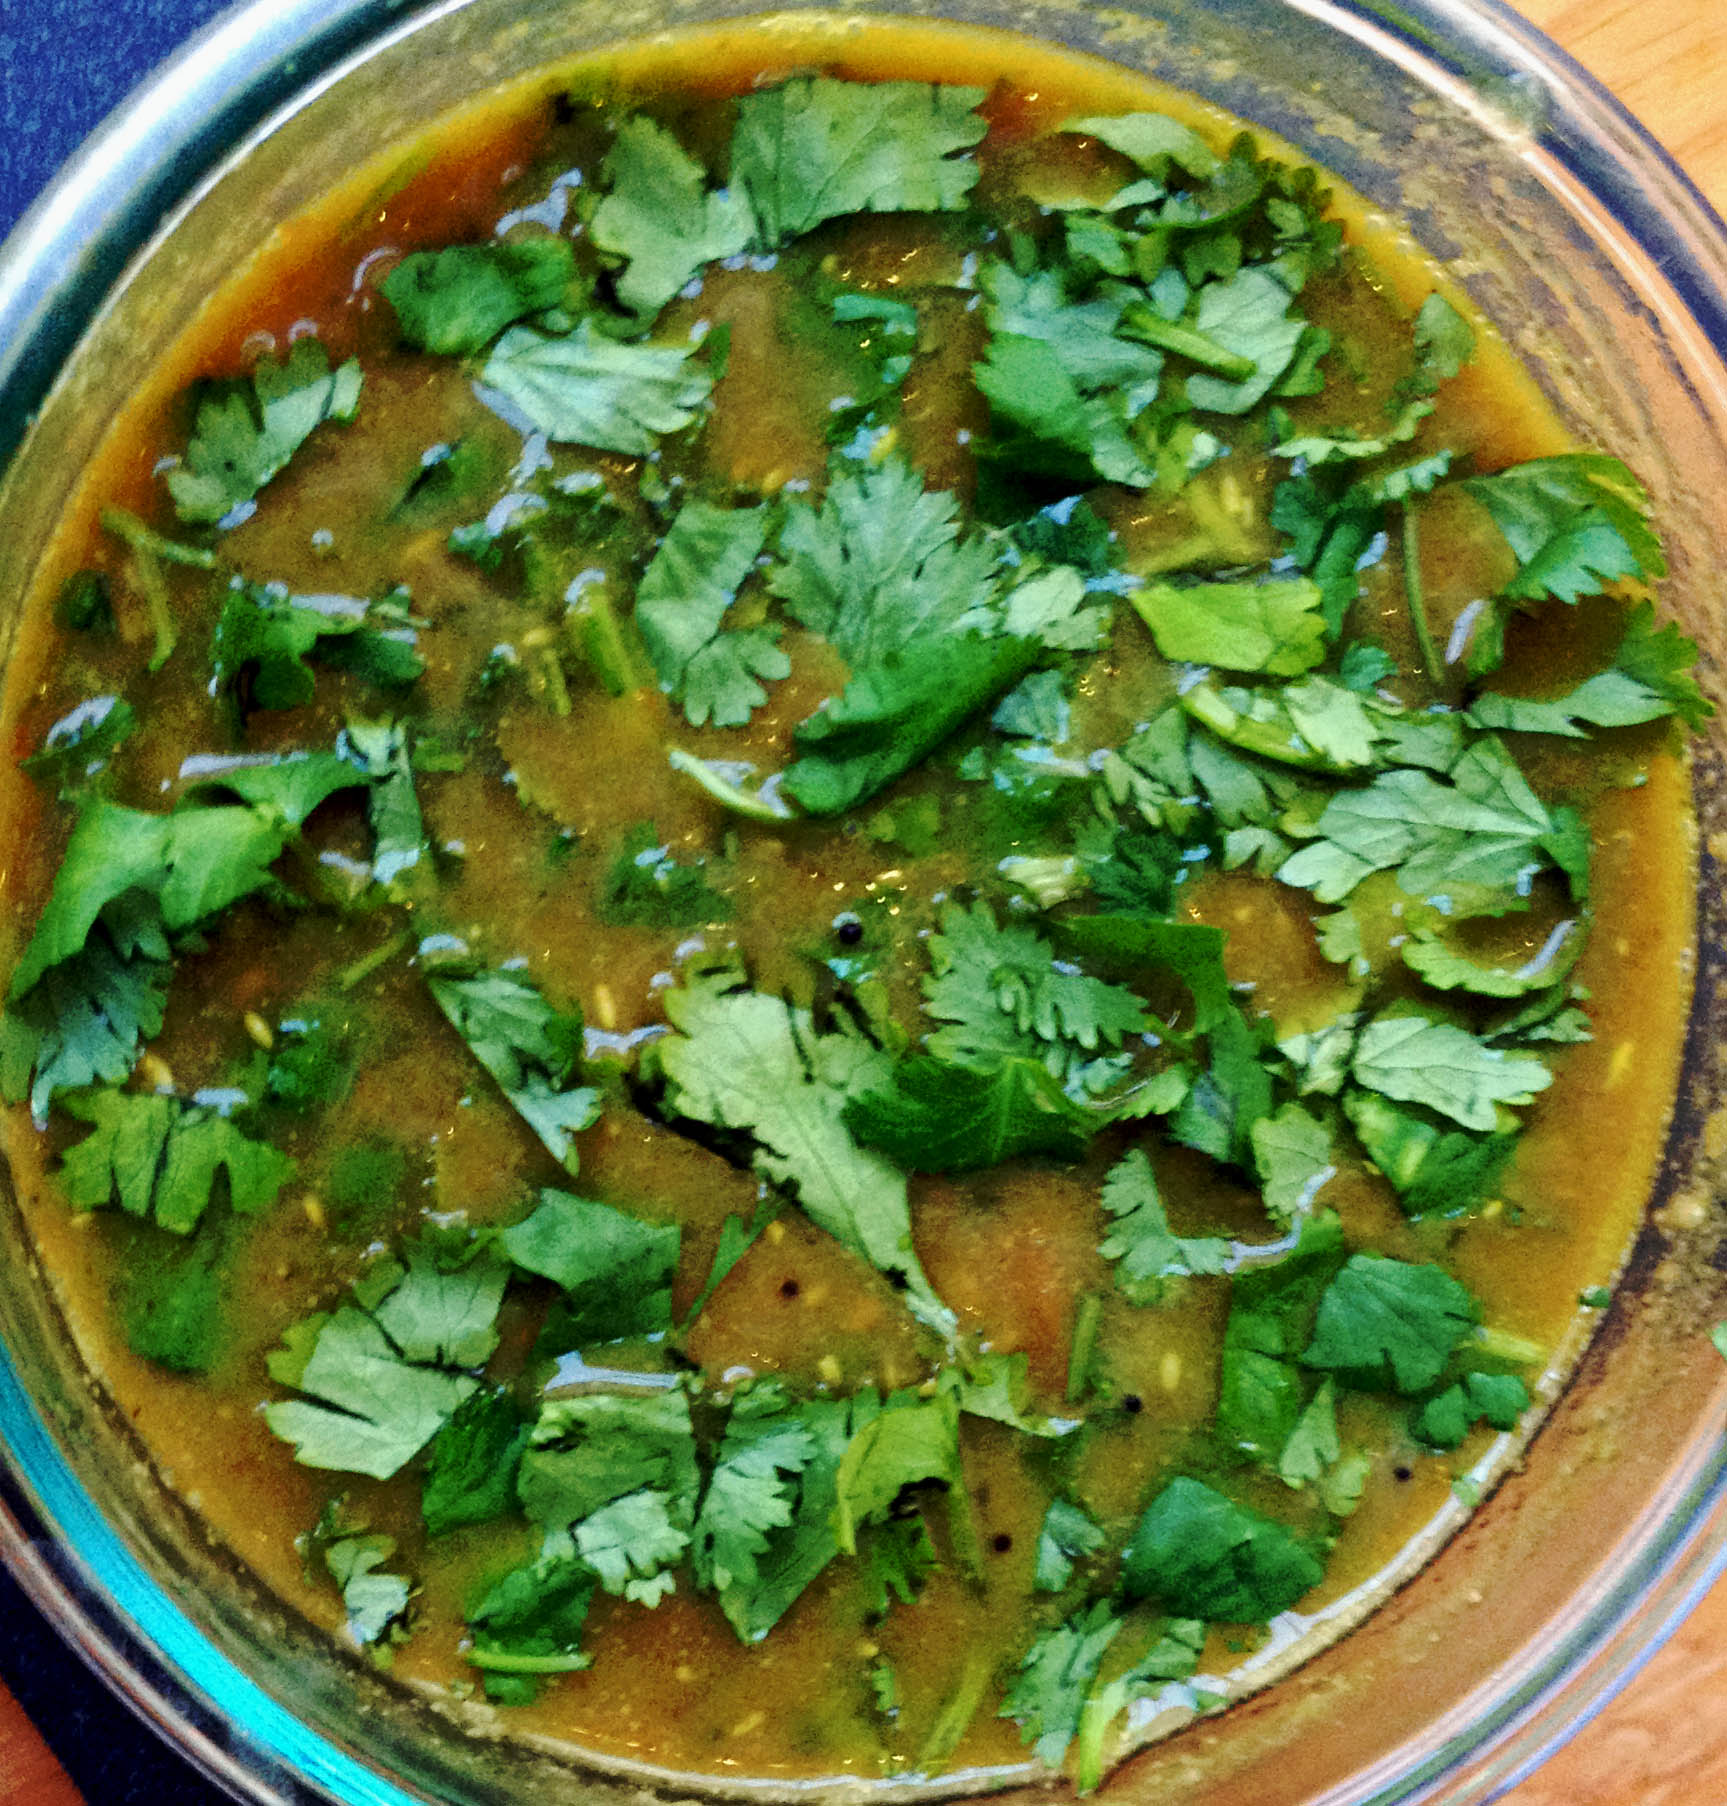 Garlic Stew (Indian Style) - If you don't try it, you may miss something very Tasty!